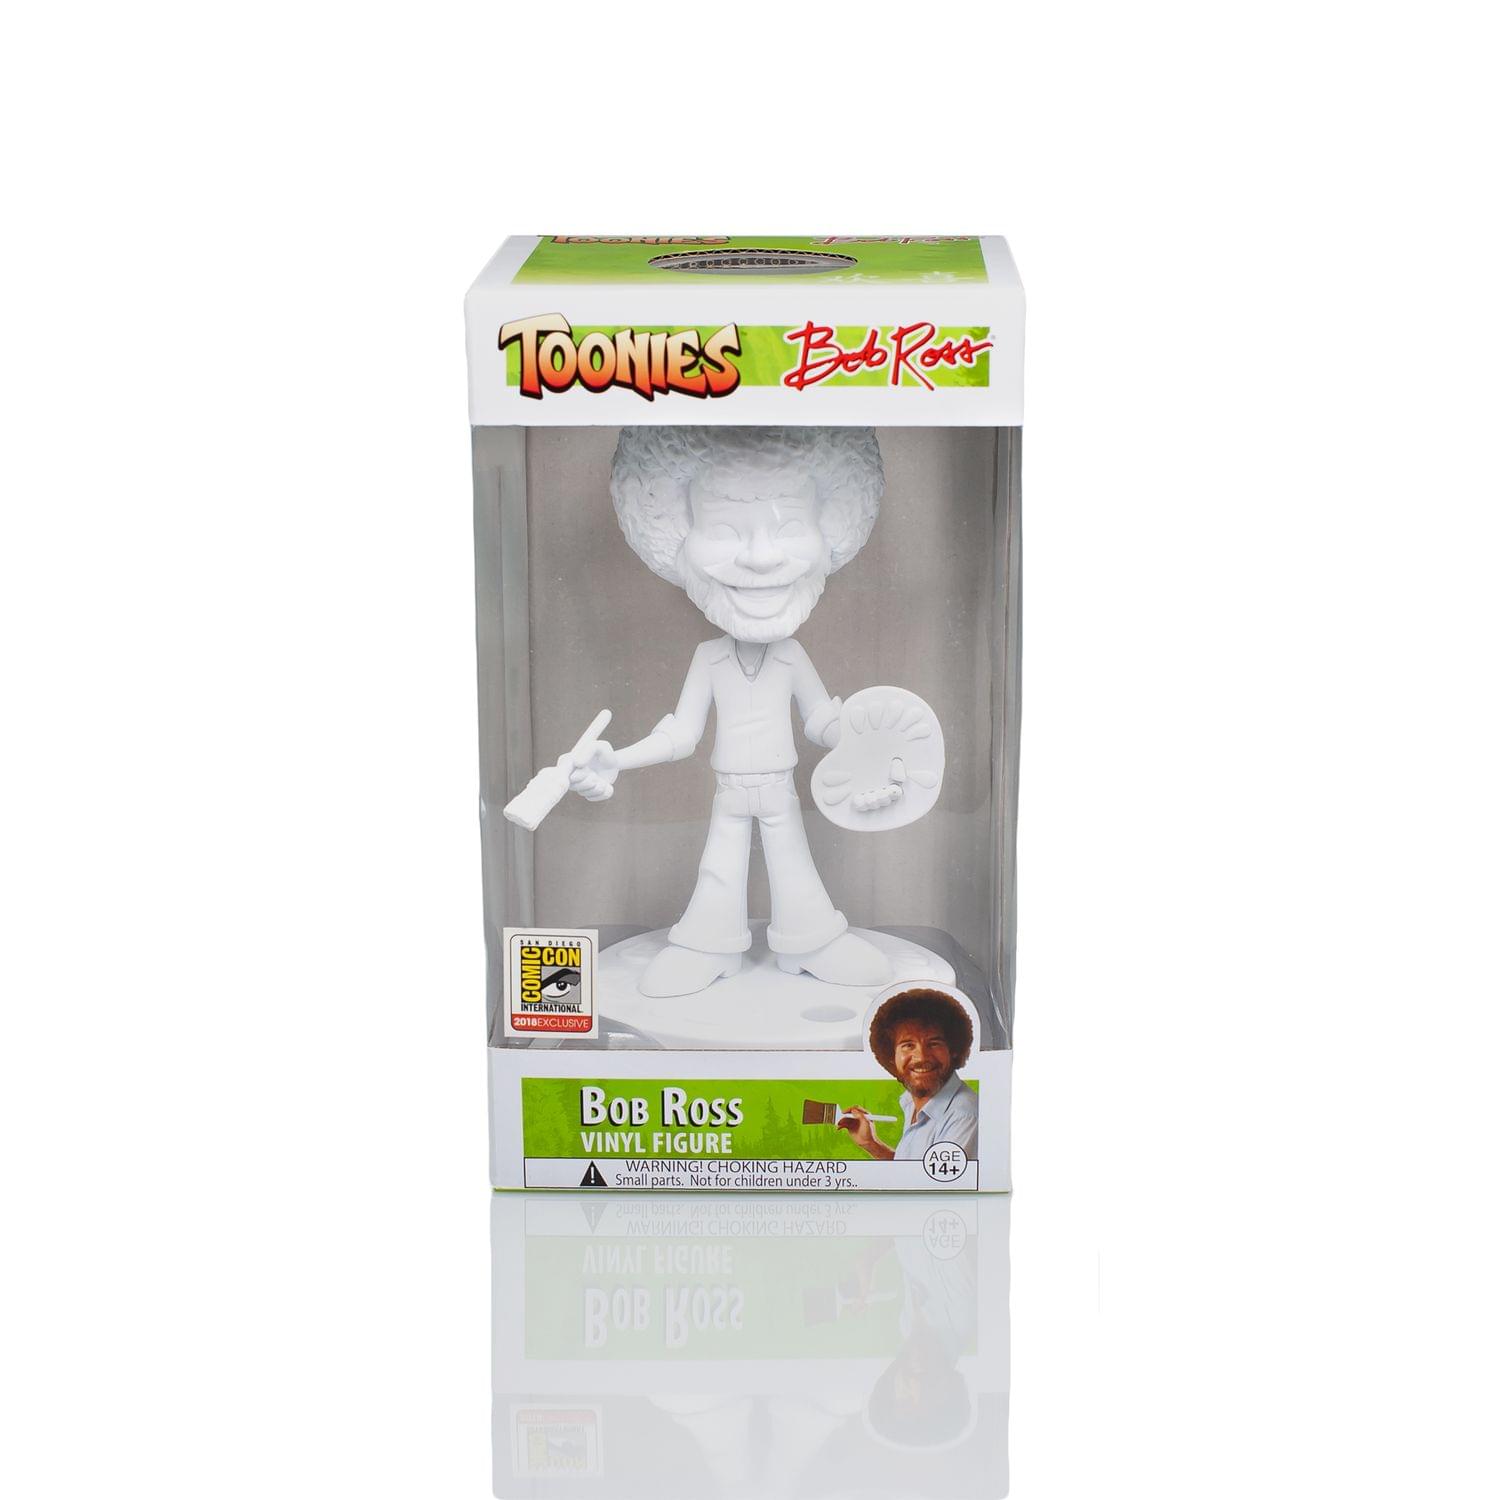 TOONIES "PAINT YOUR OWN" BOB ROSS 6.5" VINYL FIGURE COLLECTIBLE | WHITE VARIANT